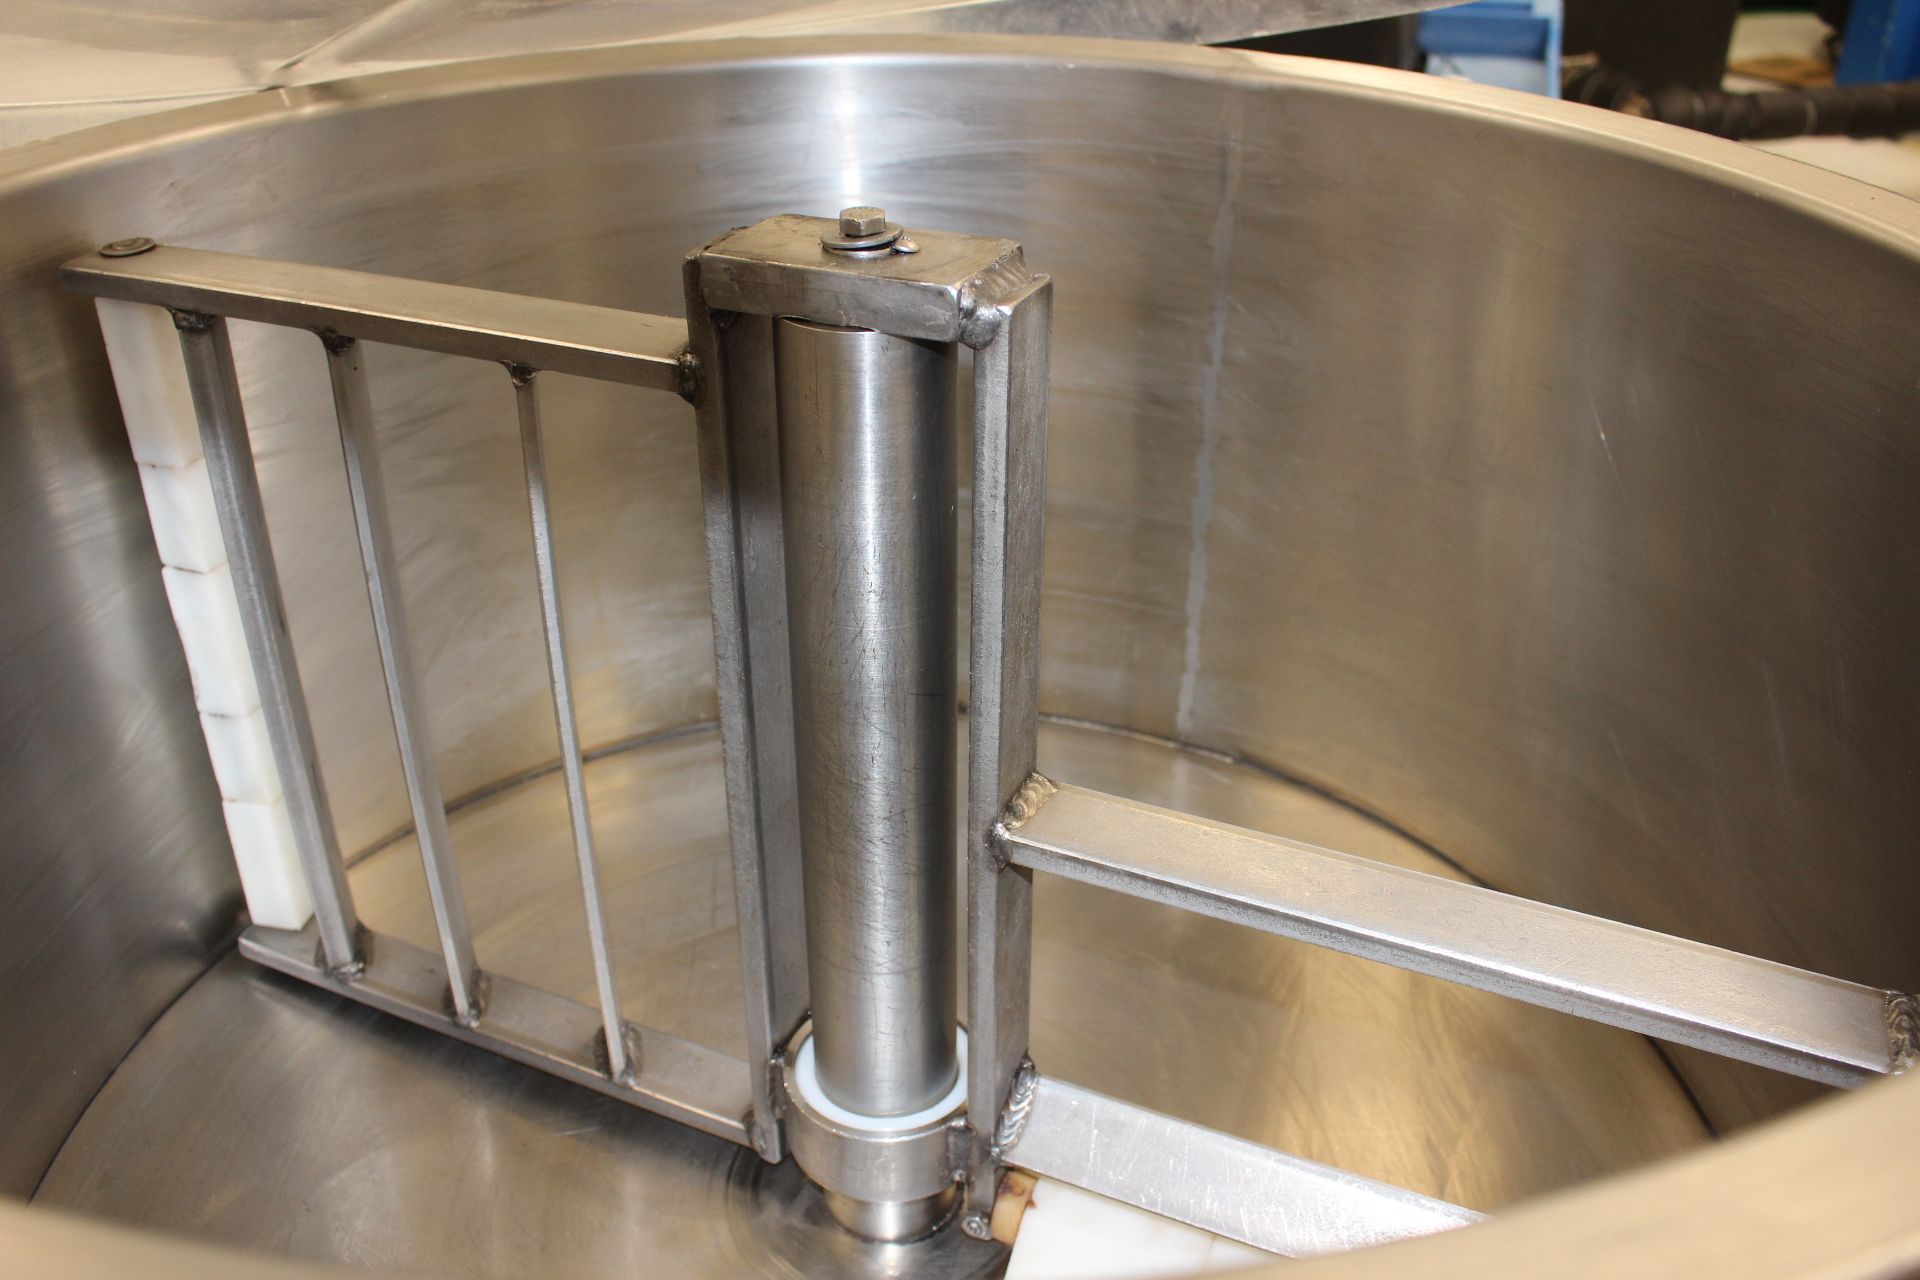 Chocolate Concepts 400-lb Stainless Steel Water Jacketed and Agitated Chocolate Melter with (2) - Image 3 of 3